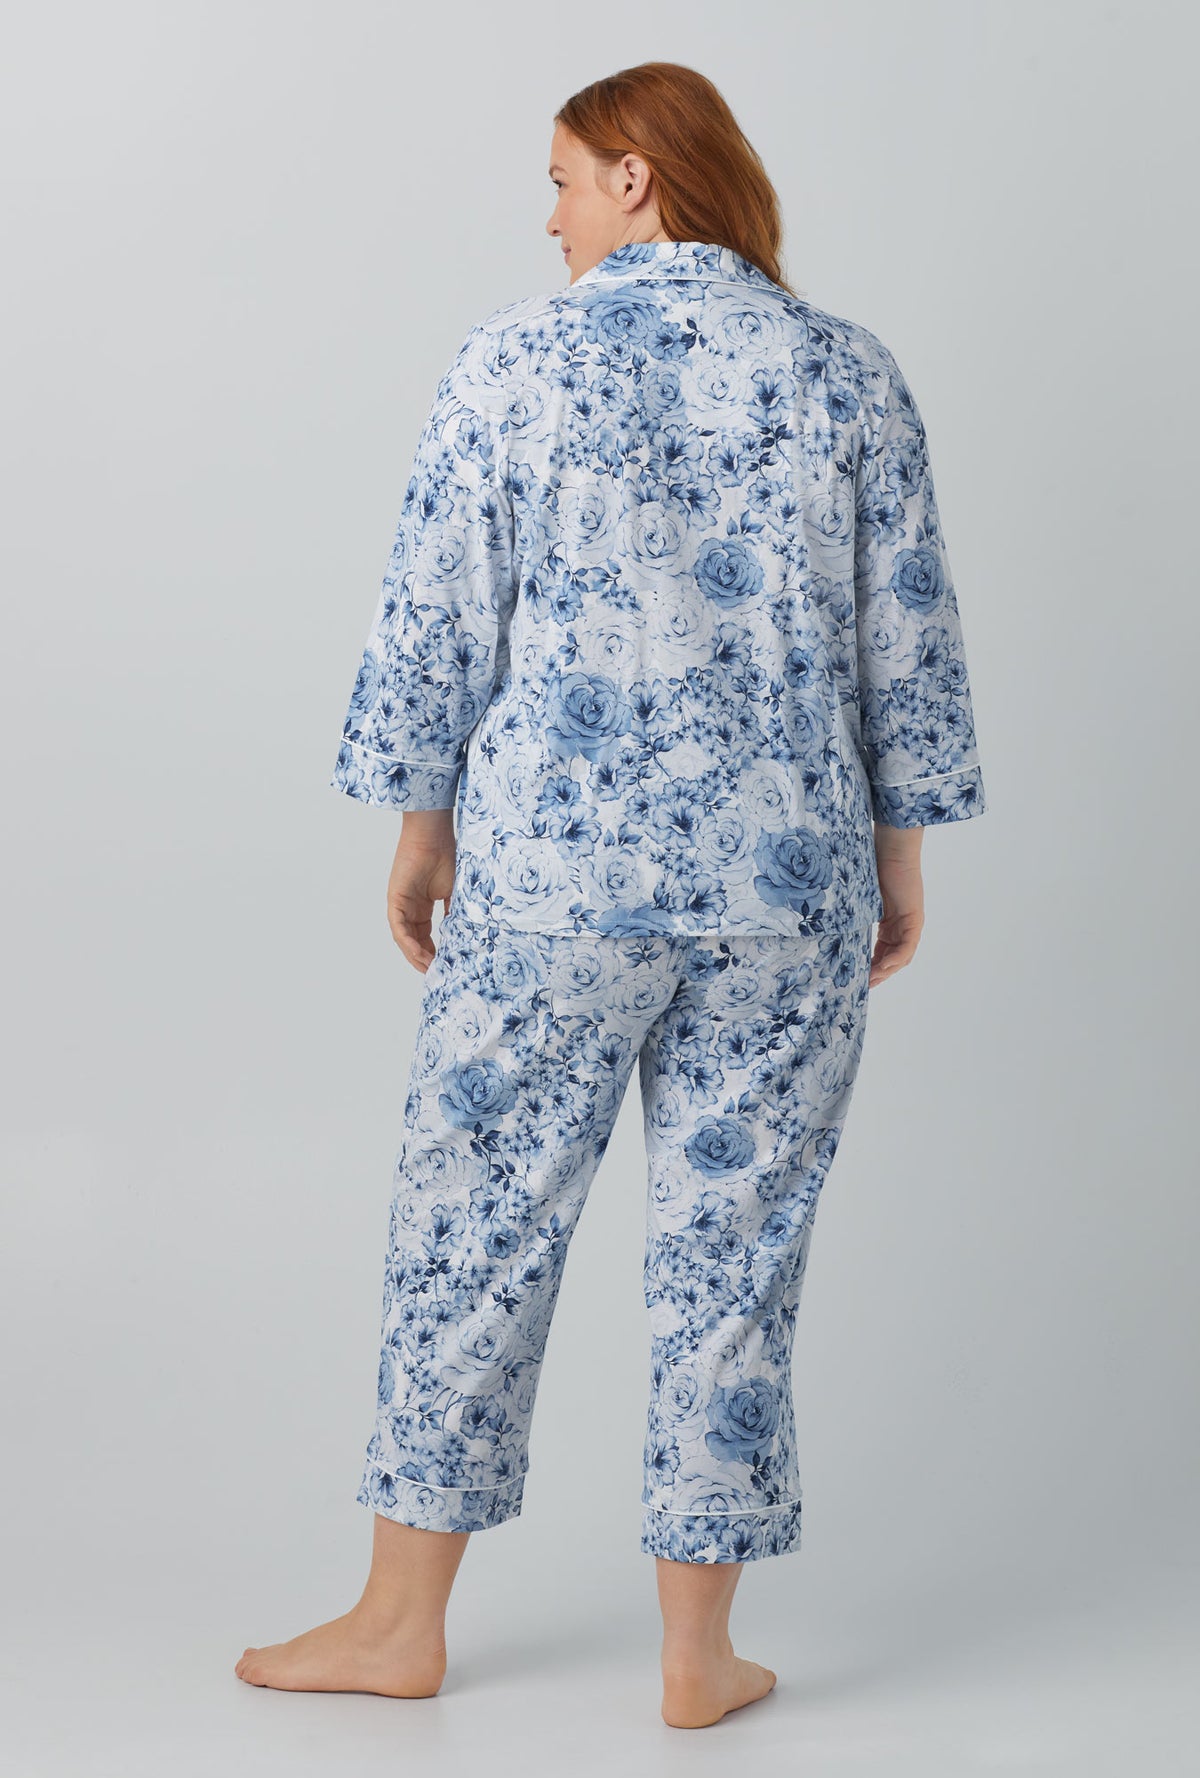 A lady wearing blue quarter sleeve classic stretch jersey cropped pj set with eternal blooms print.